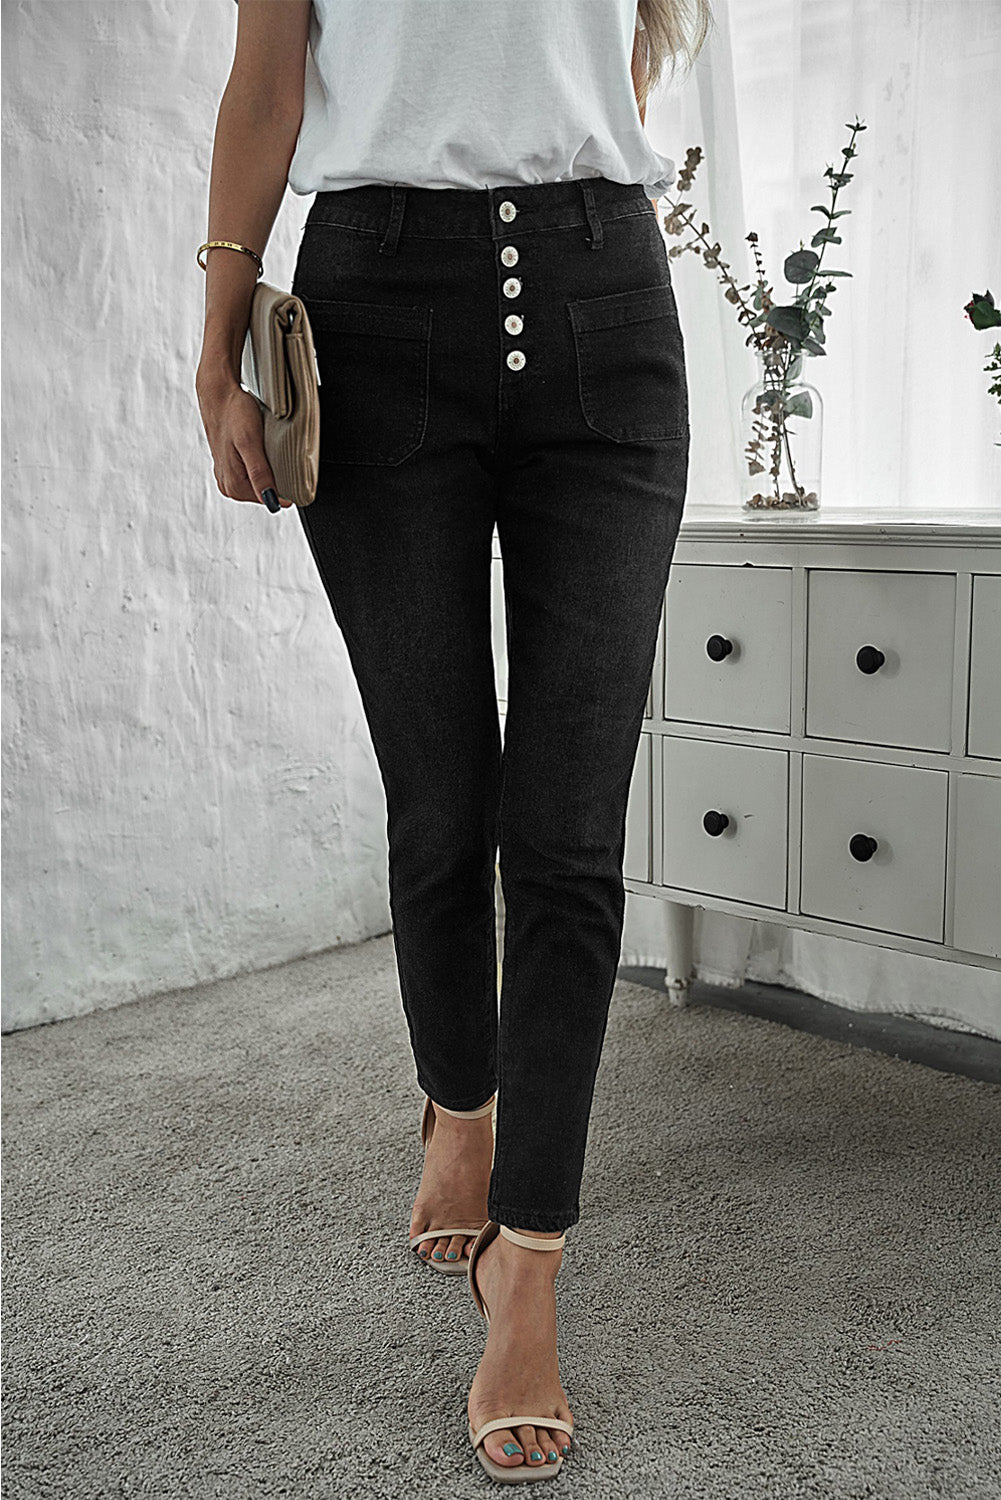 Fashion Women Black Button Fly Skinny Jeans with Pockets